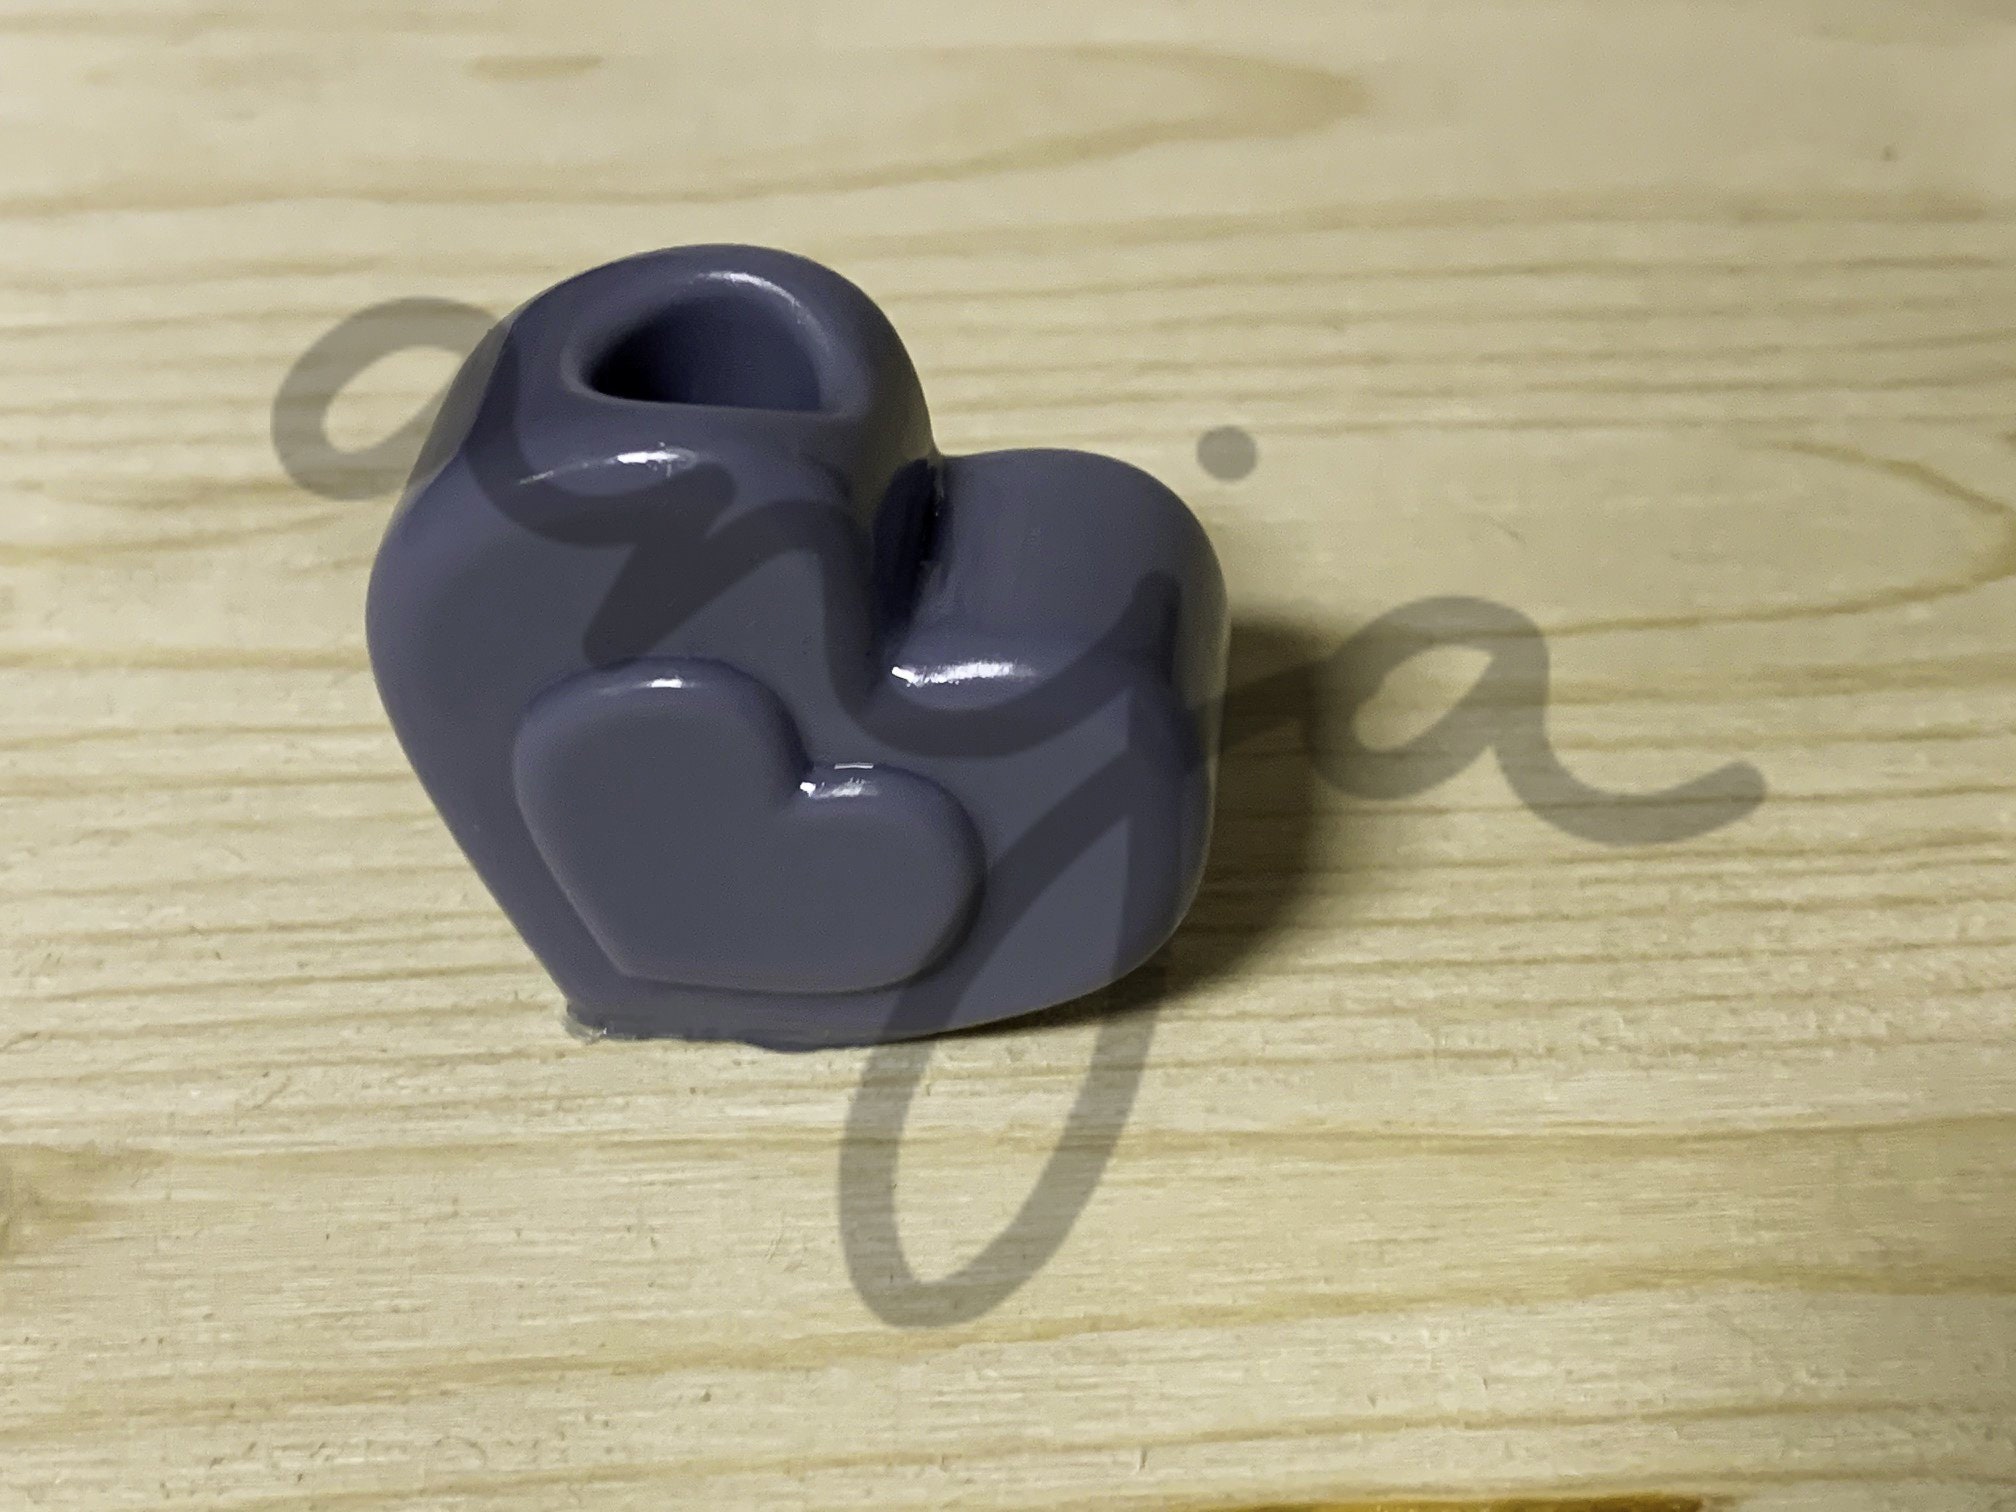 1.8,1.5,1 /10 Cavities Sweet Hearts Silicone Mold/ Heart Silicone